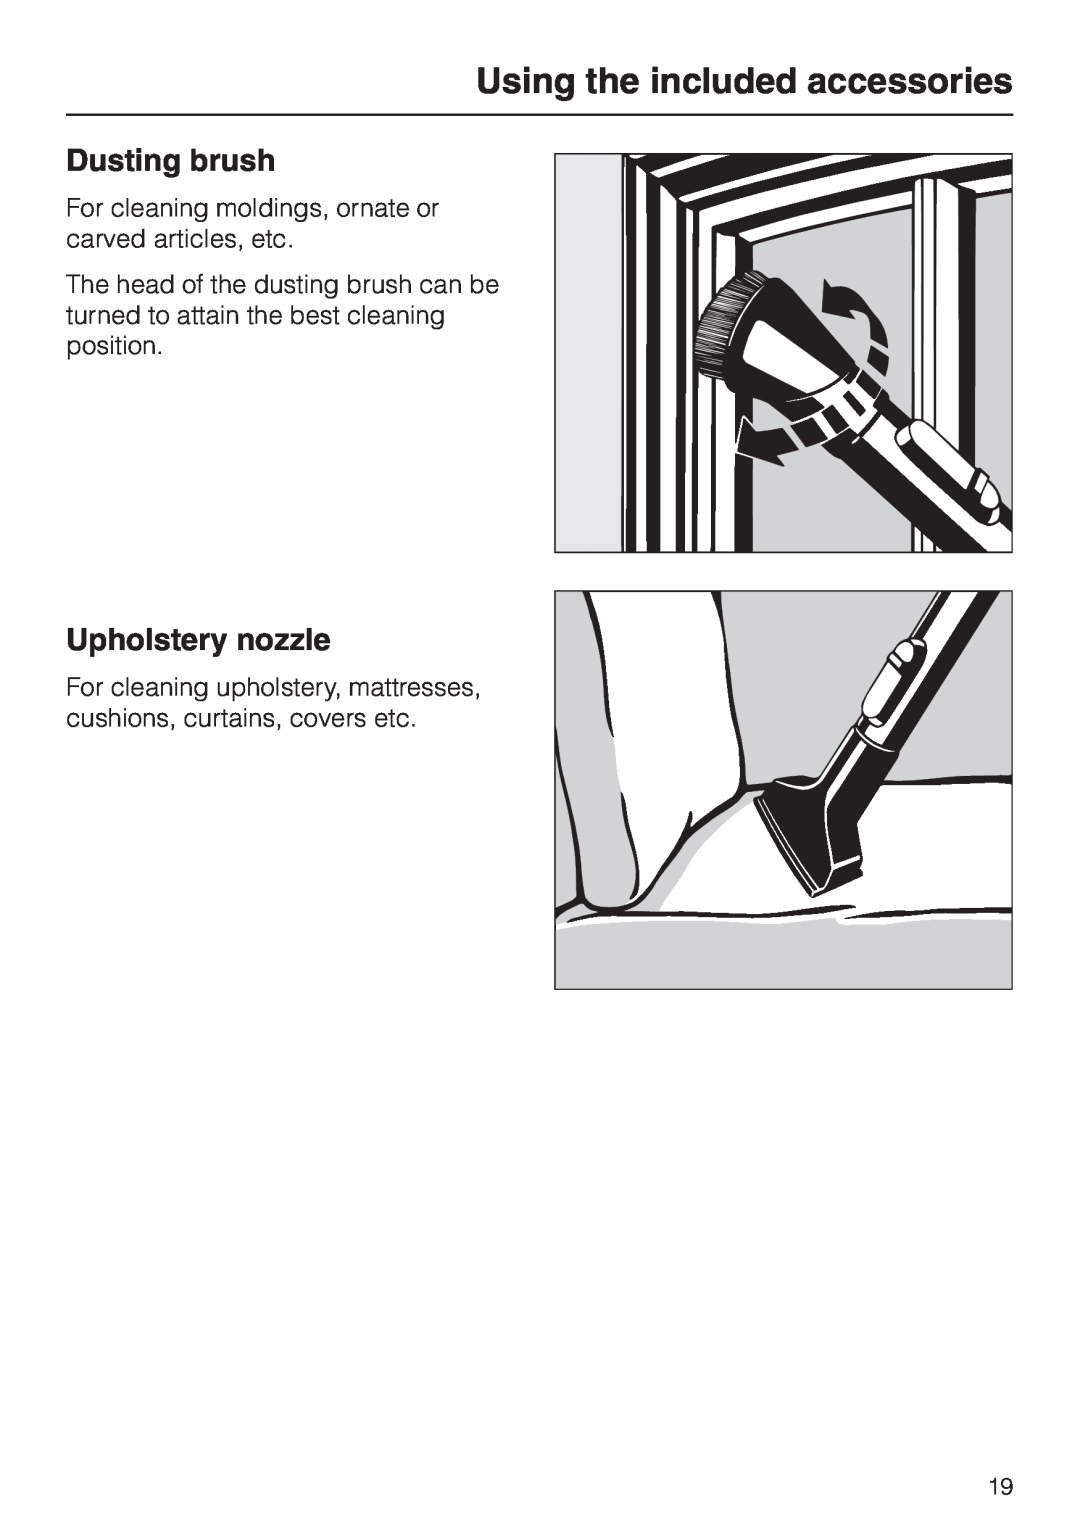 Miele S 300I, S 318I manual Dusting brush, Upholstery nozzle, Using the included accessories 